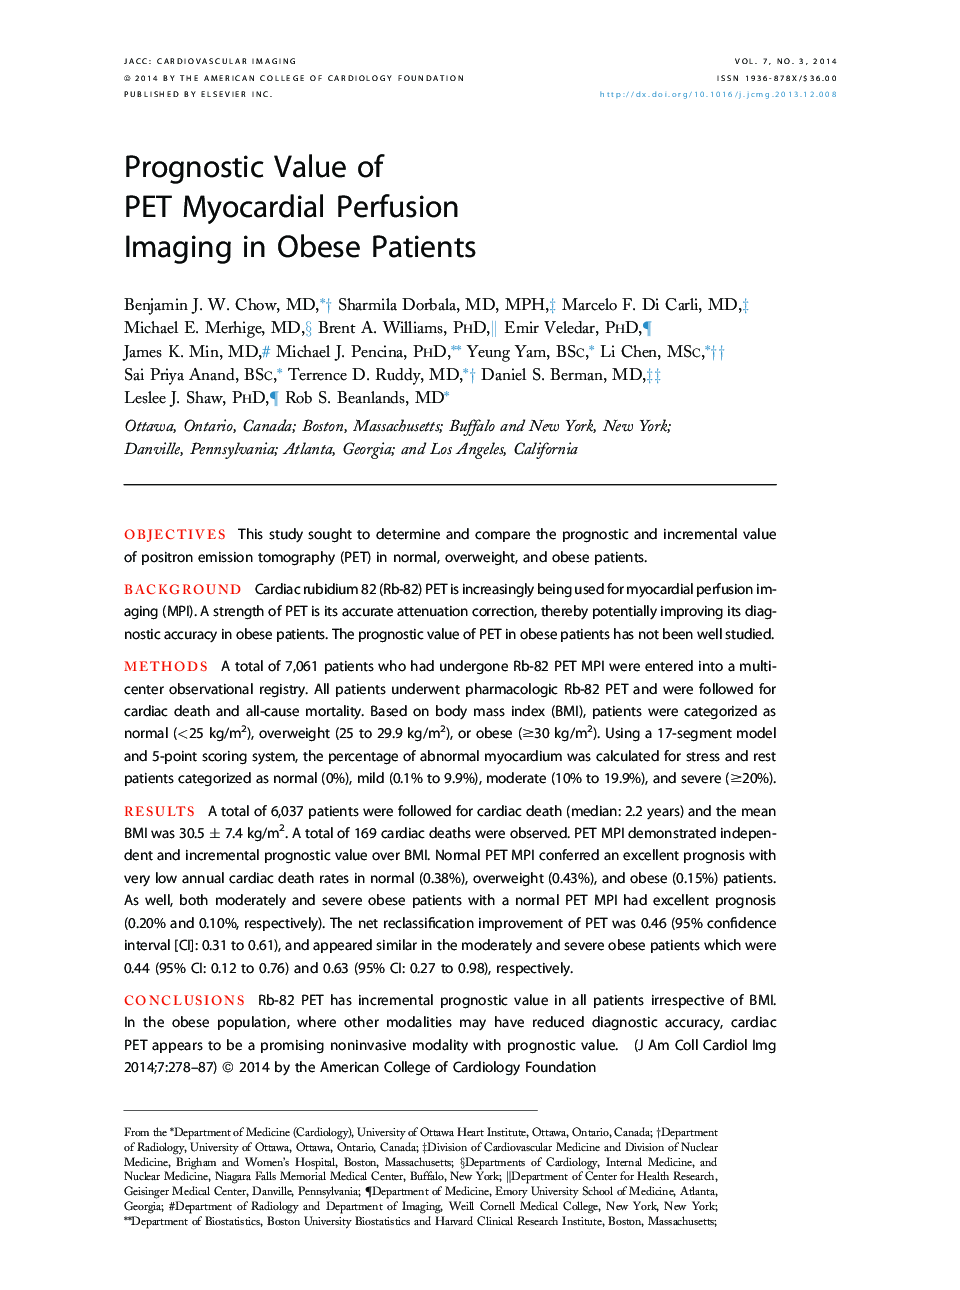 Prognostic Value of PET Myocardial Perfusion Imaging in Obese Patients 